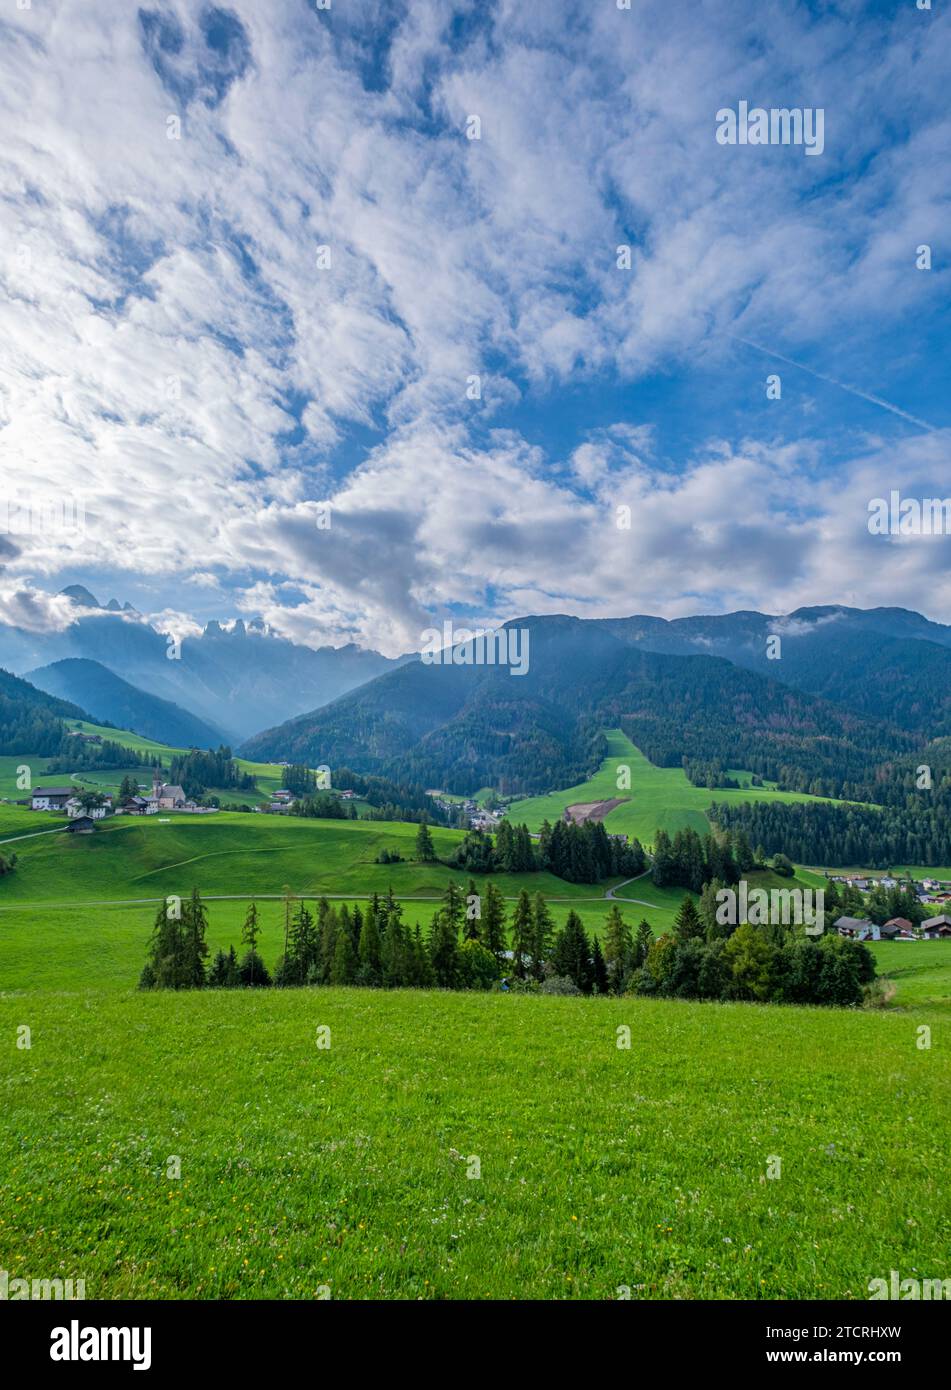 Santa Maddalena, Val di Funes, Alpine village, iconic church, meadows, forest trails, and Tyrolean charm create a picturesque scene with breathtaking Stock Photo